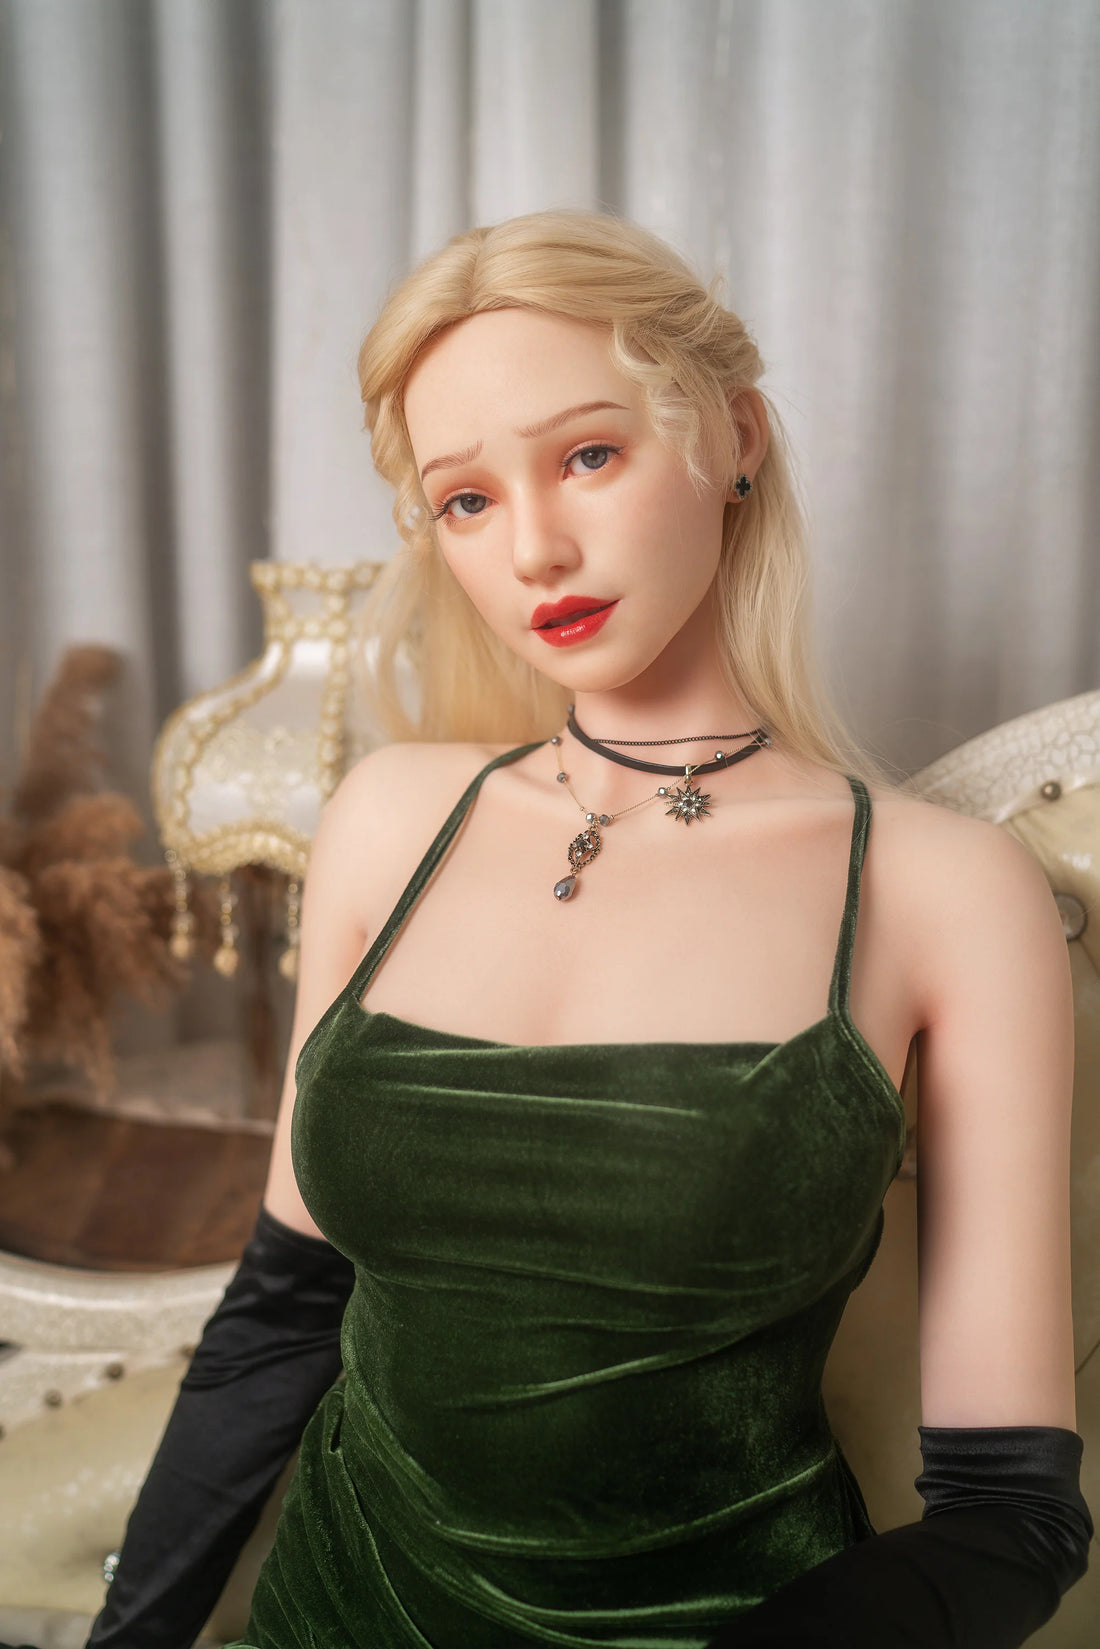 175cm/5ft9 E-Cup Super Real Silicone Sex Doll with 